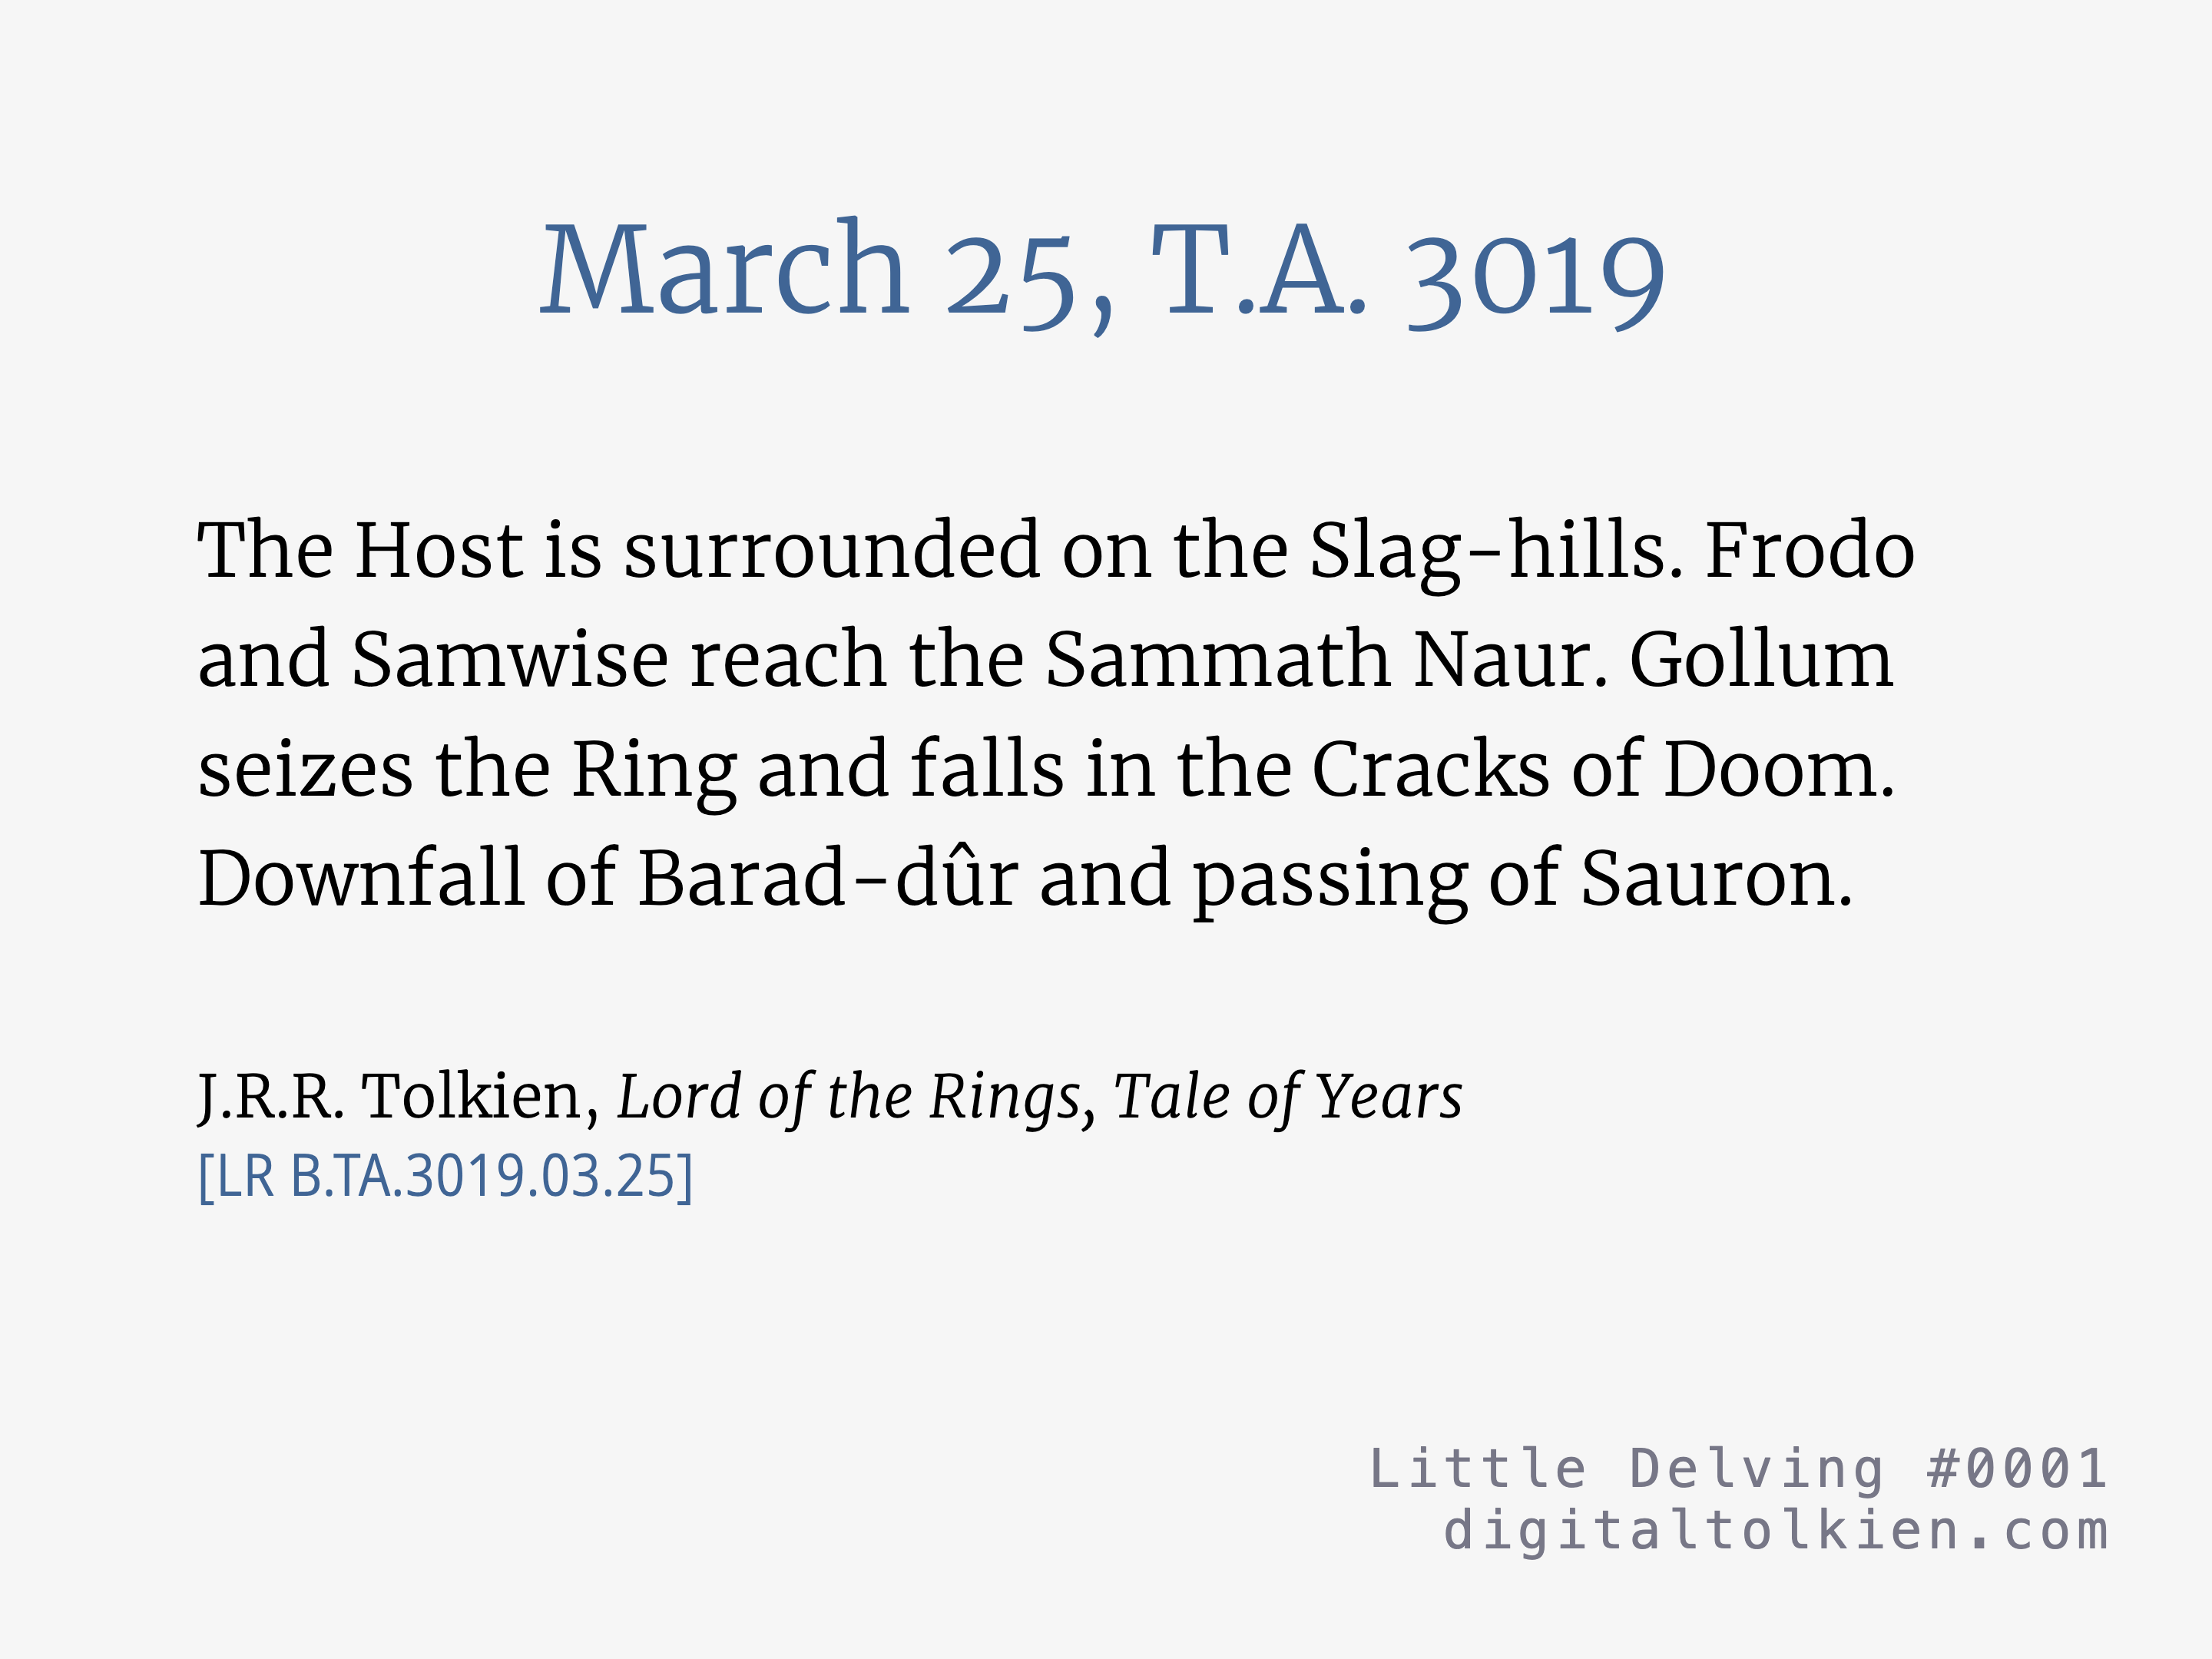 March 25, T.A. 3019
        The Host is surrounded on the Slag-hills. Frodo and Samwise reach the Sammath Naur. Gollum seizes the Ring and falls in the Cracks of Doom. Downfall of Barad-dûr and passing of Sauron.
        J.R.R. Tolkien, Lord of the Rings, Tale of Years
        [LR B.TA.3019.03.25]
        Little Delving #0001
        digitaltolkien.com